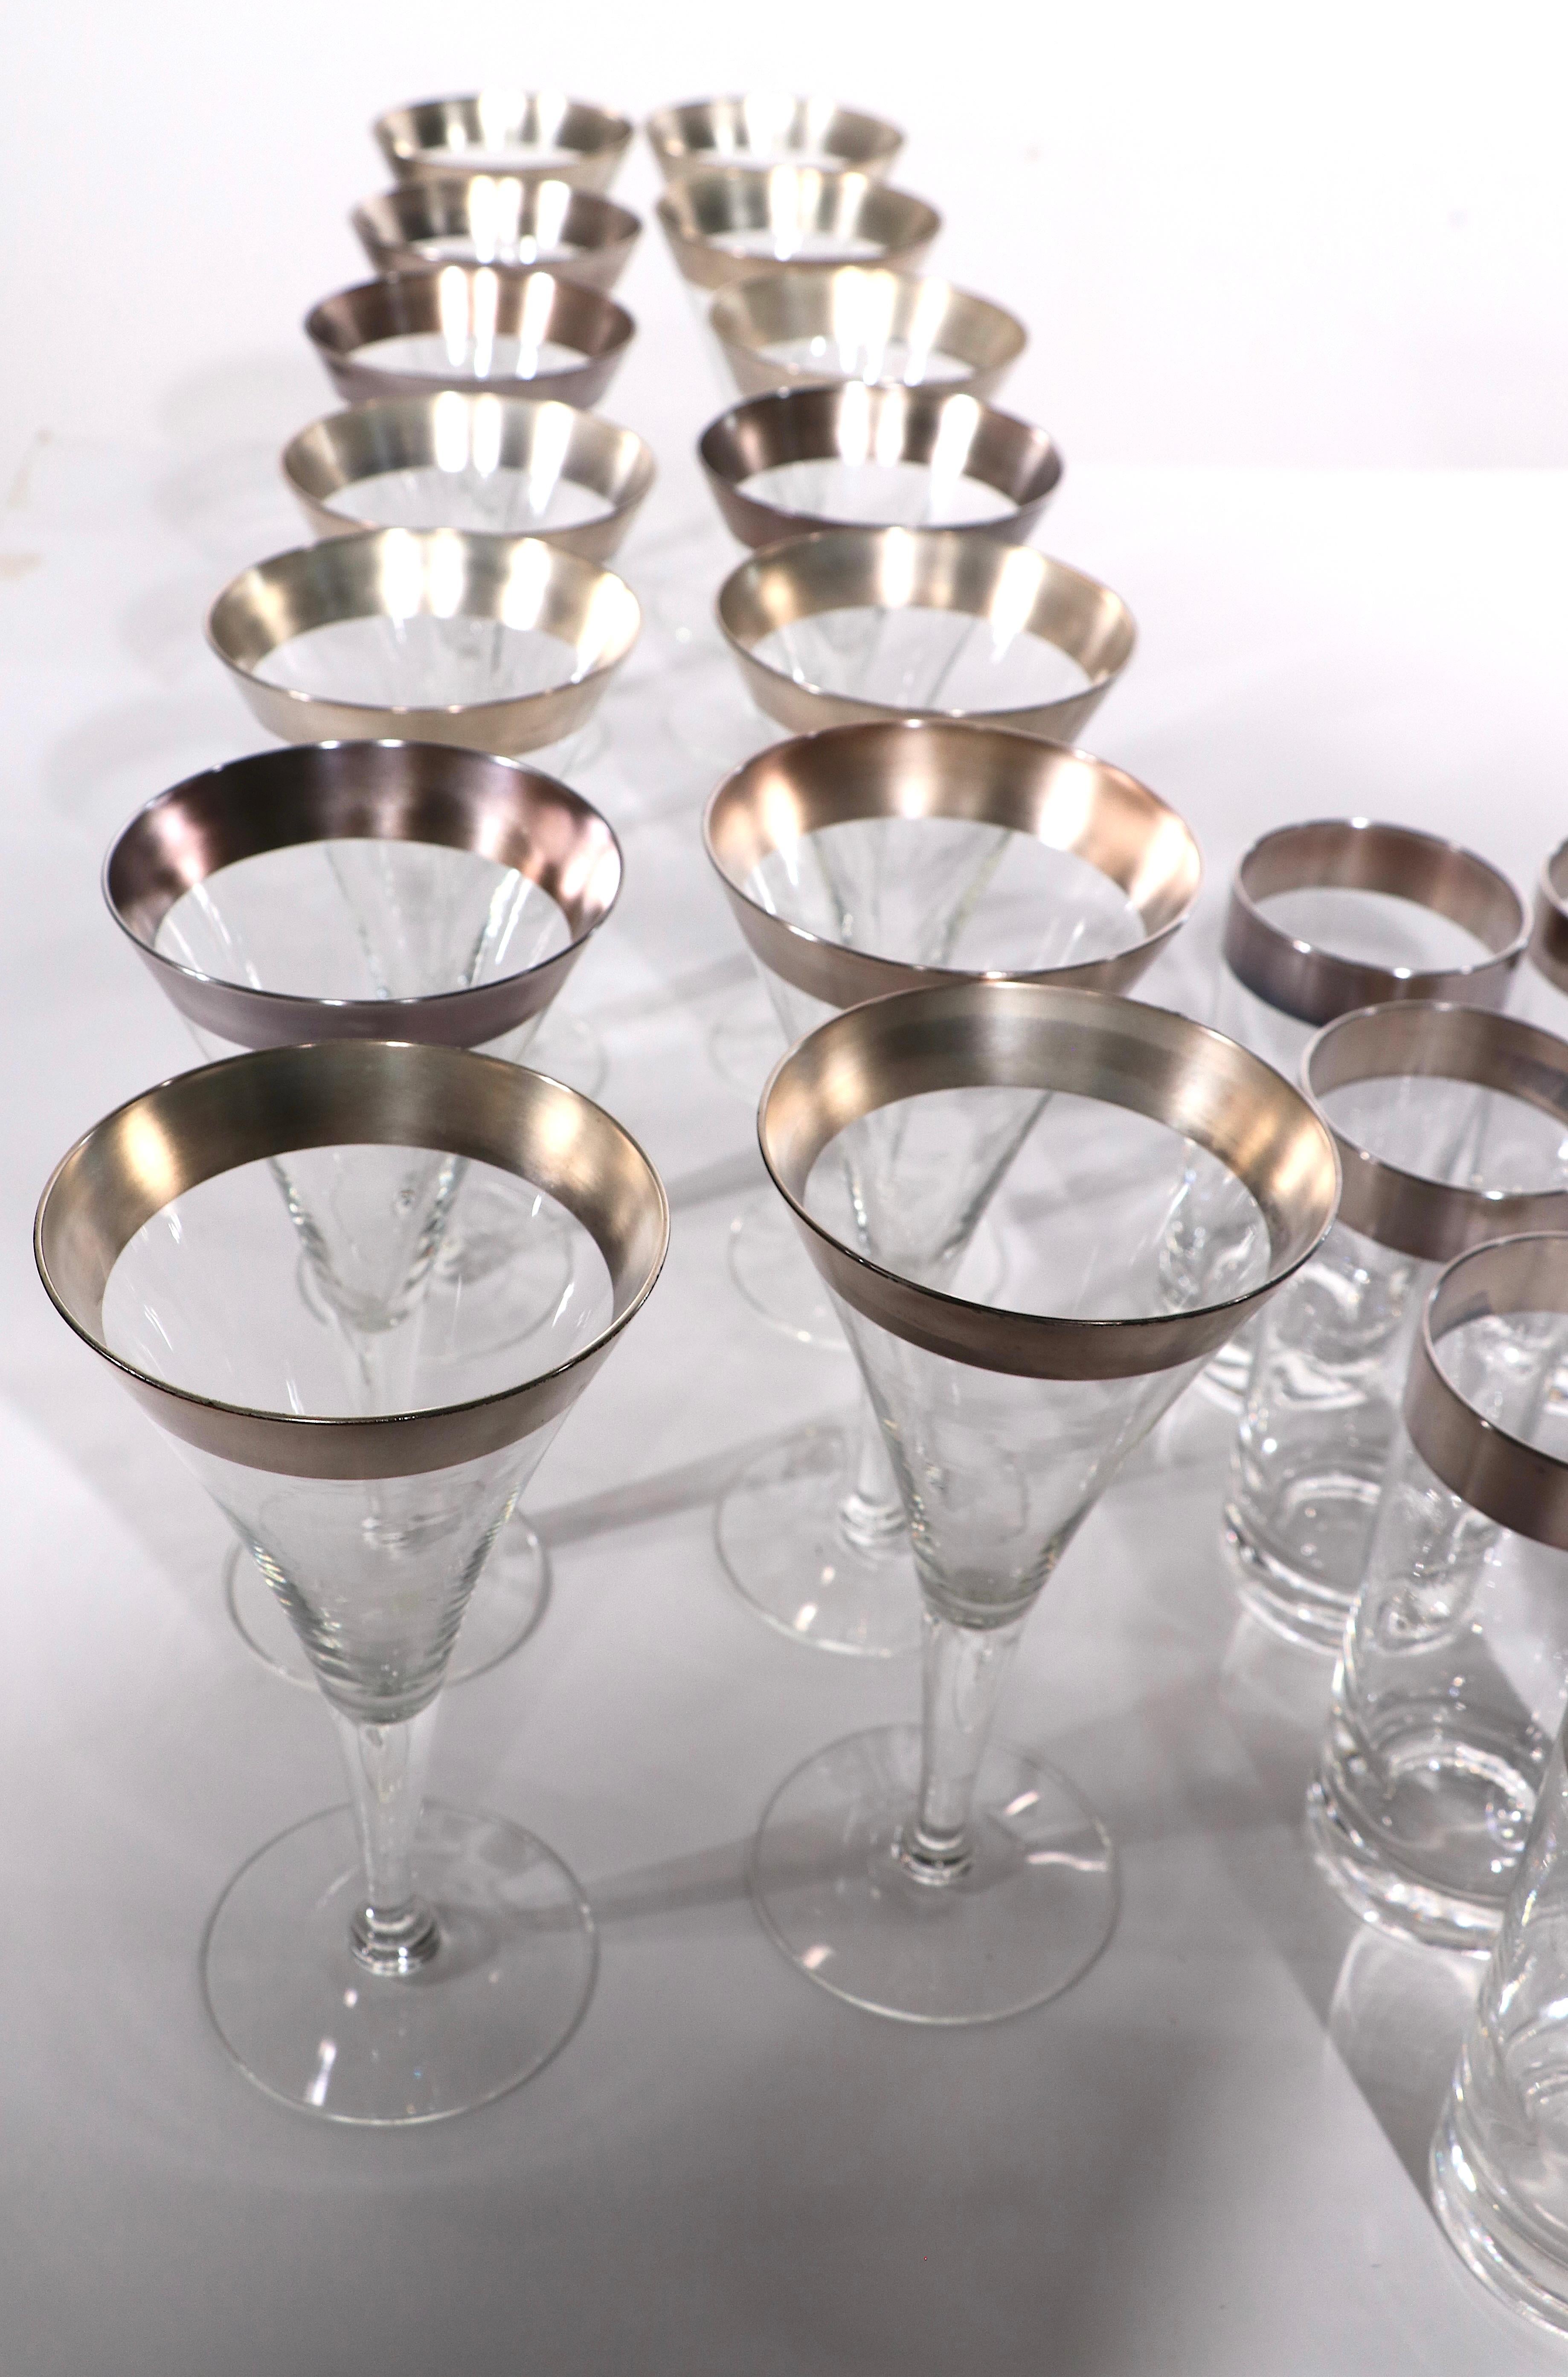 Large 82 Pc. Set of Silver Band Stemware Att. to Dorothy Thorpe In Good Condition For Sale In New York, NY